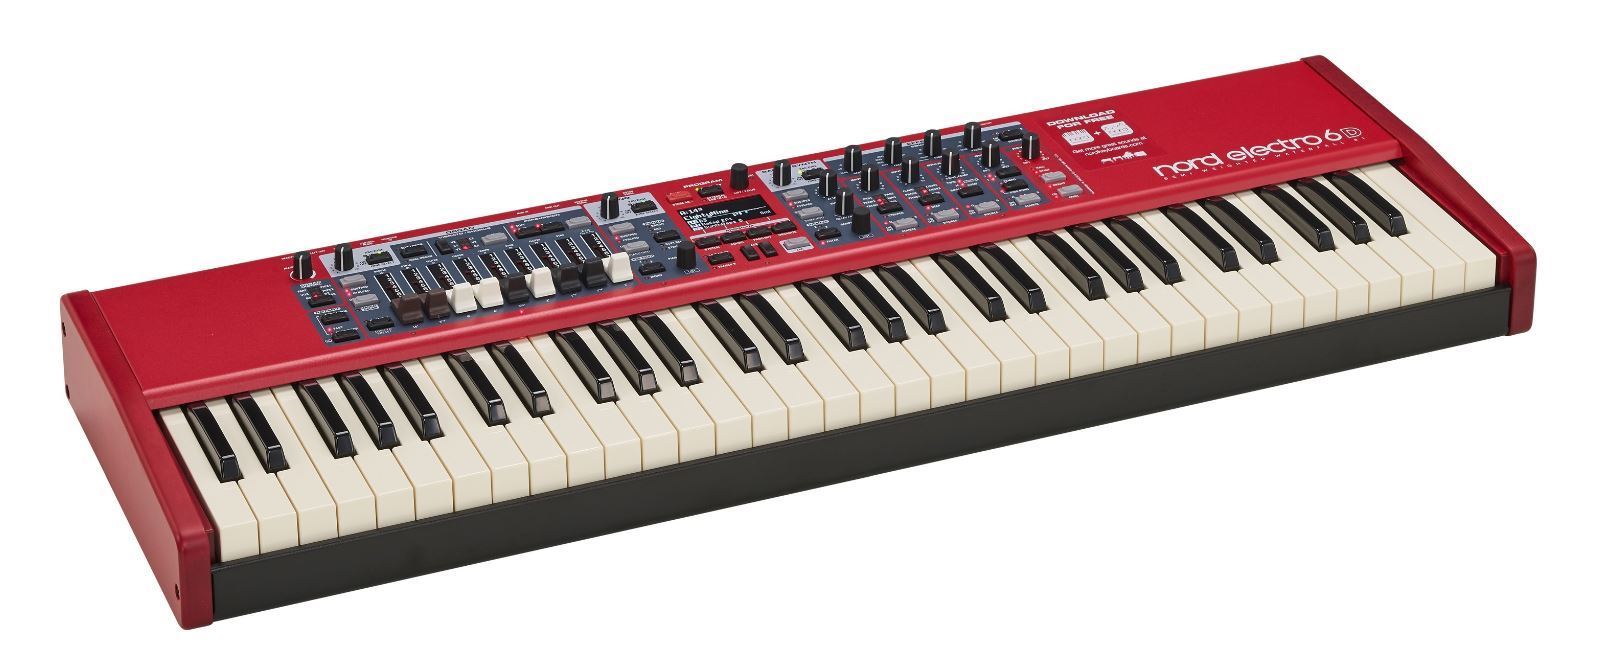 Nord electro. Nord Electro 6d. Nord 6. Vox Continental Organ. Цифровое пианино Nord Electro 6d 61.